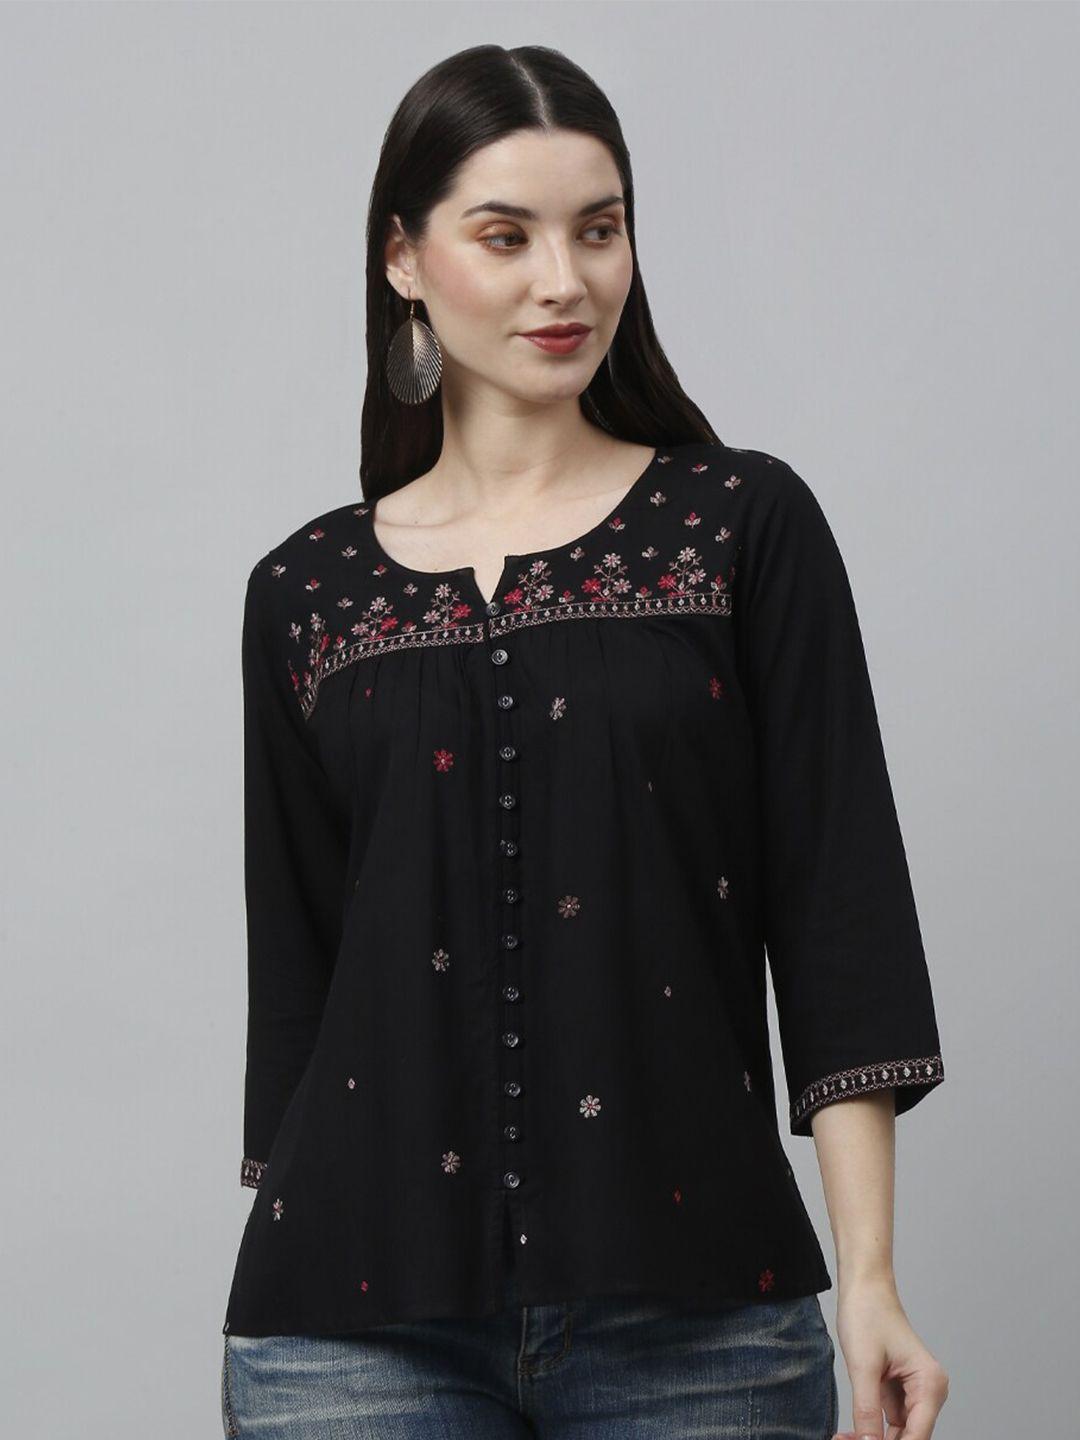 gracit-floral-embroidery-round-neck-three-quarter-sleeves-top